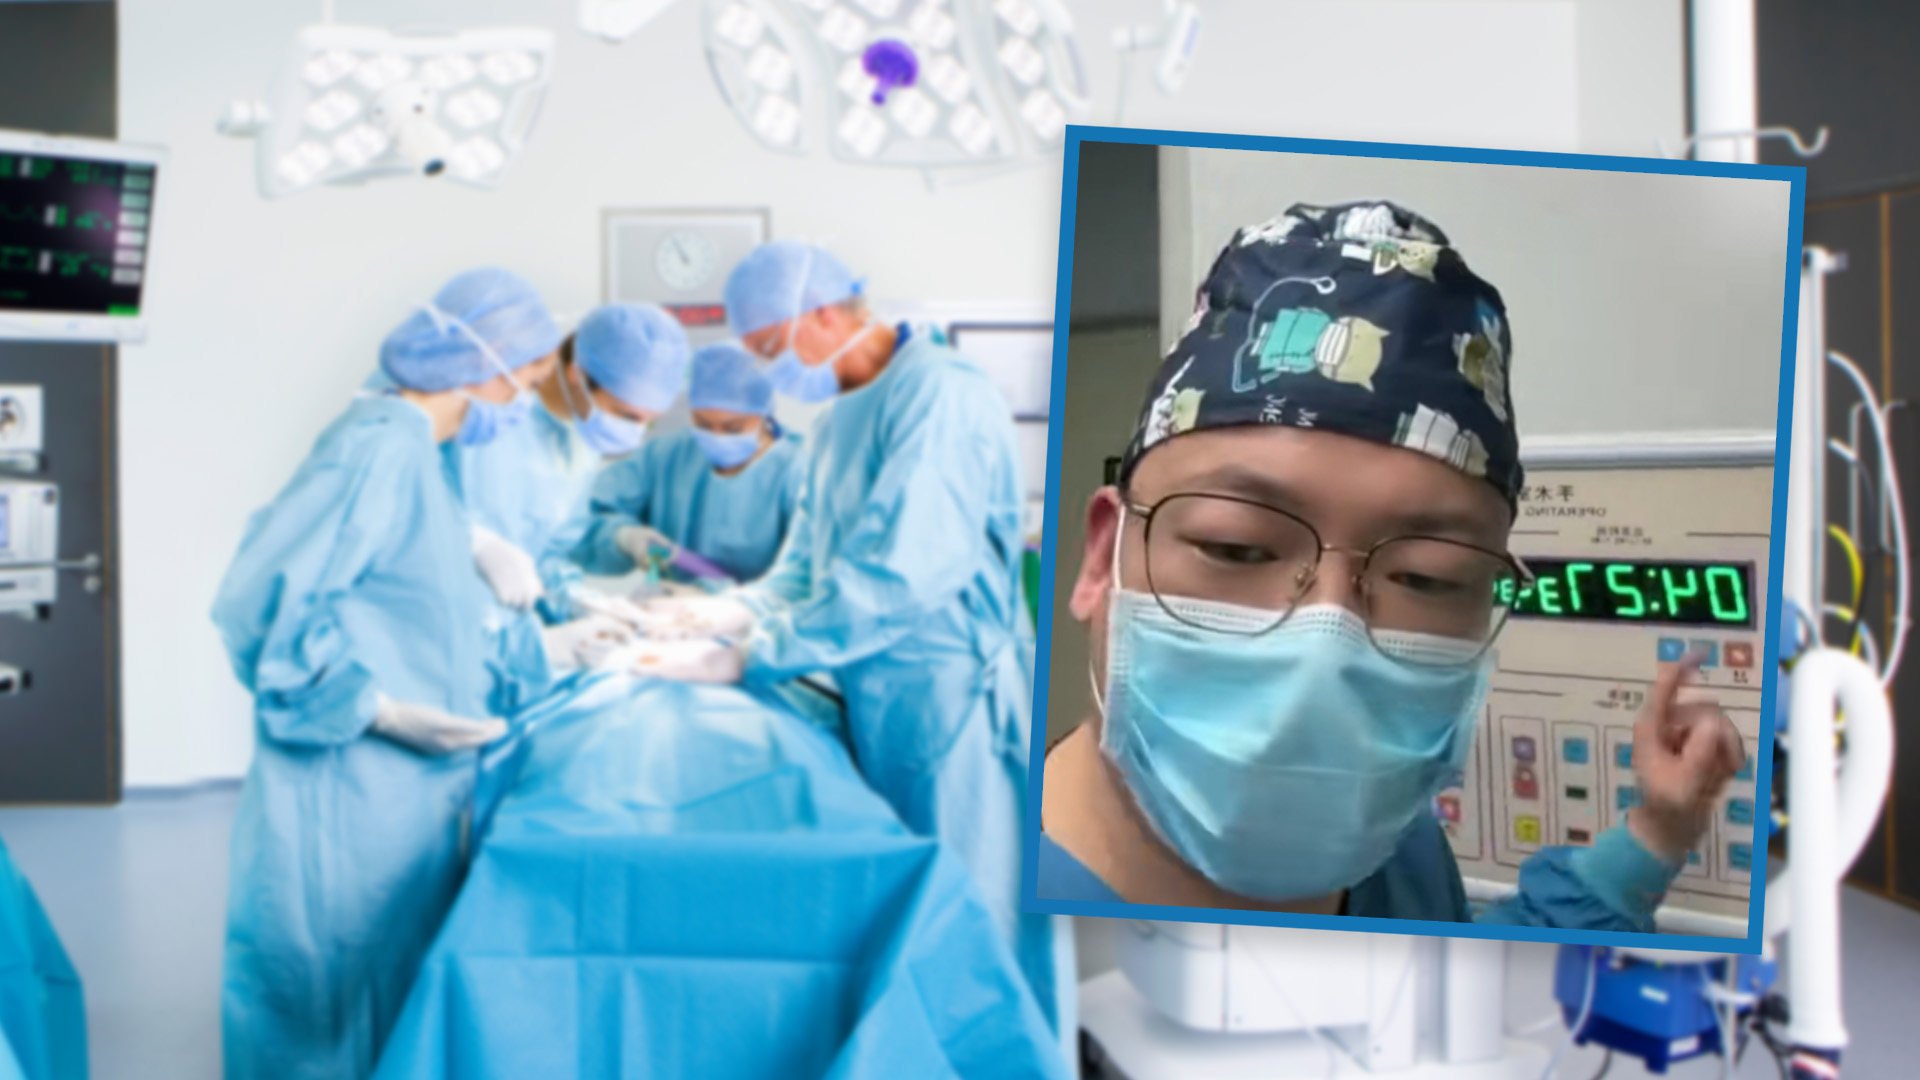 A doctor online influencer in China has been banned for staging fake operations on social media to boost his online profile. Photo: SCMP composite/Shutterstock/Douyin

